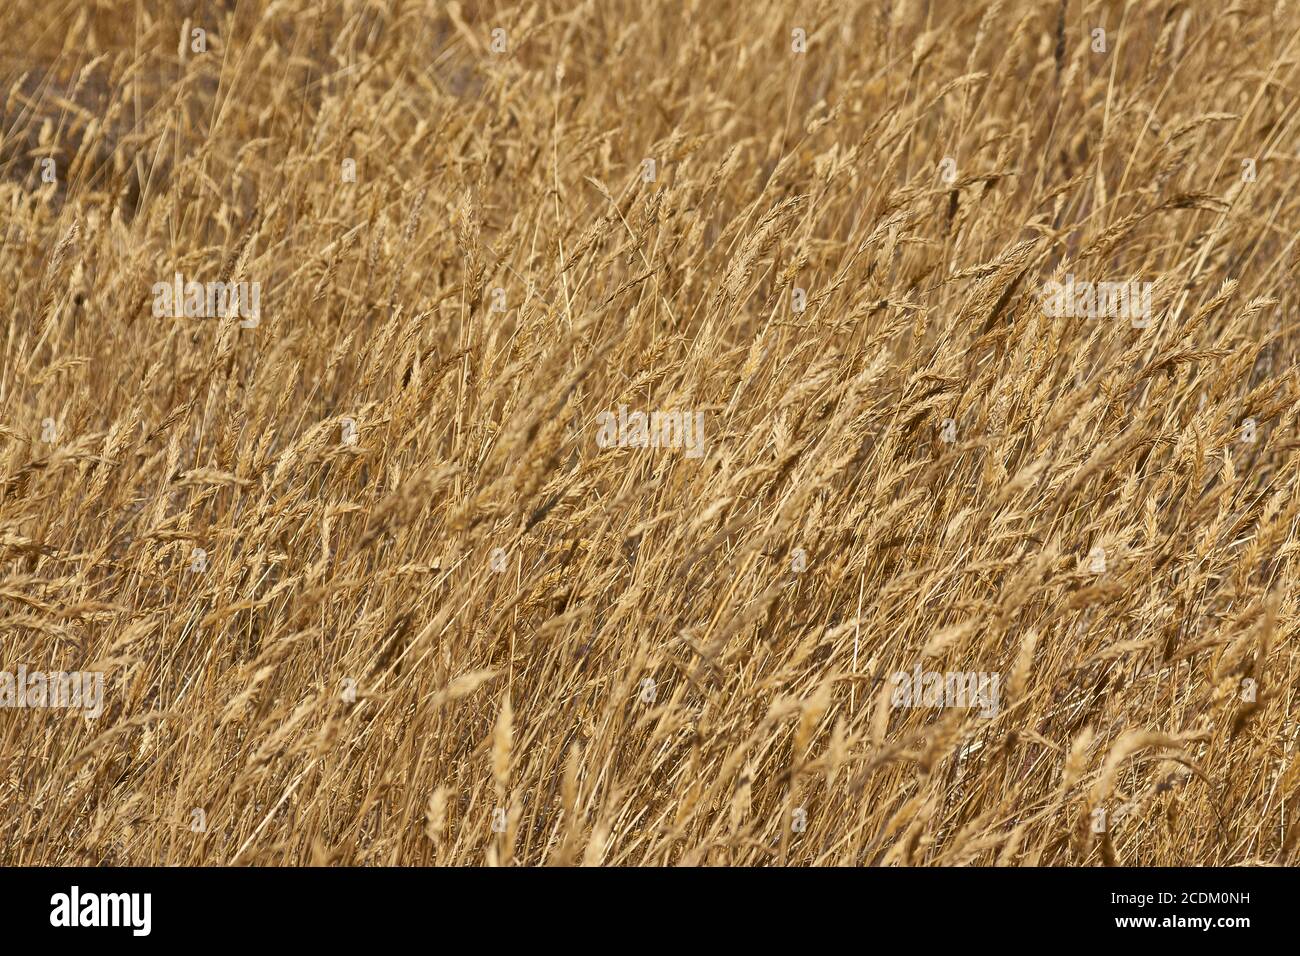 dry brown grasses blowing in the wind Stock Photo